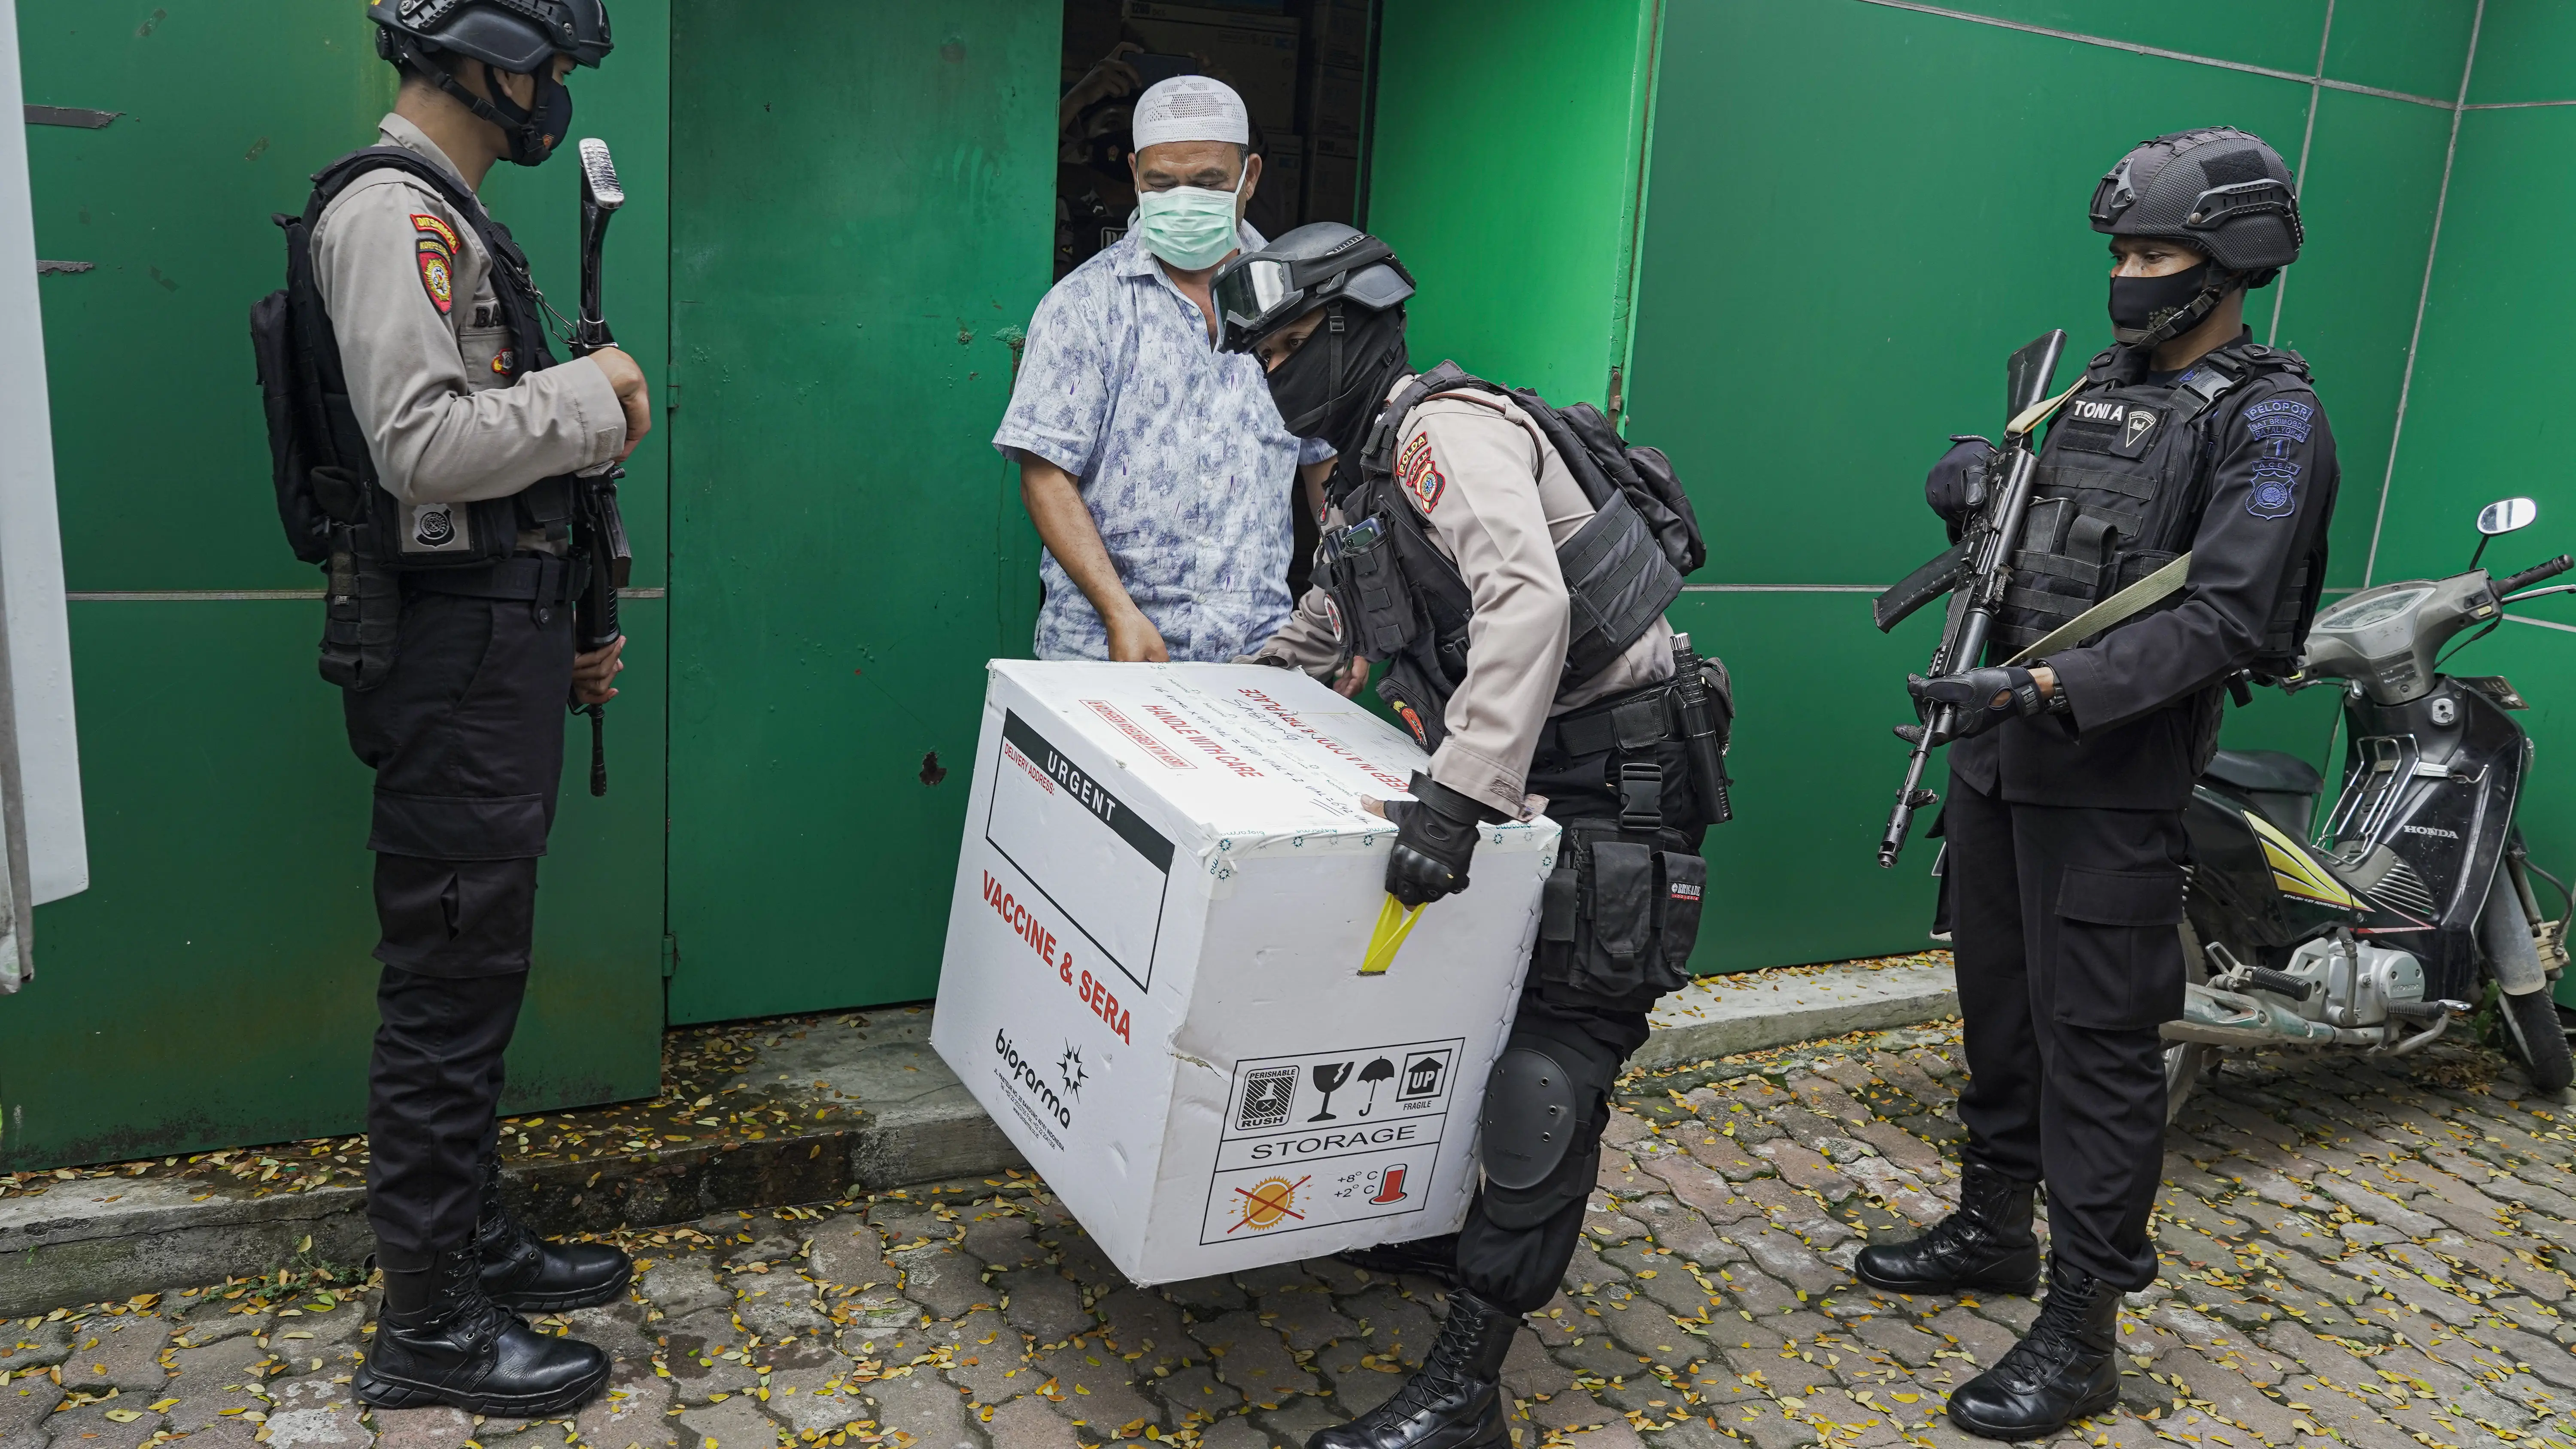 A police officer carries a large box full of vaccines.